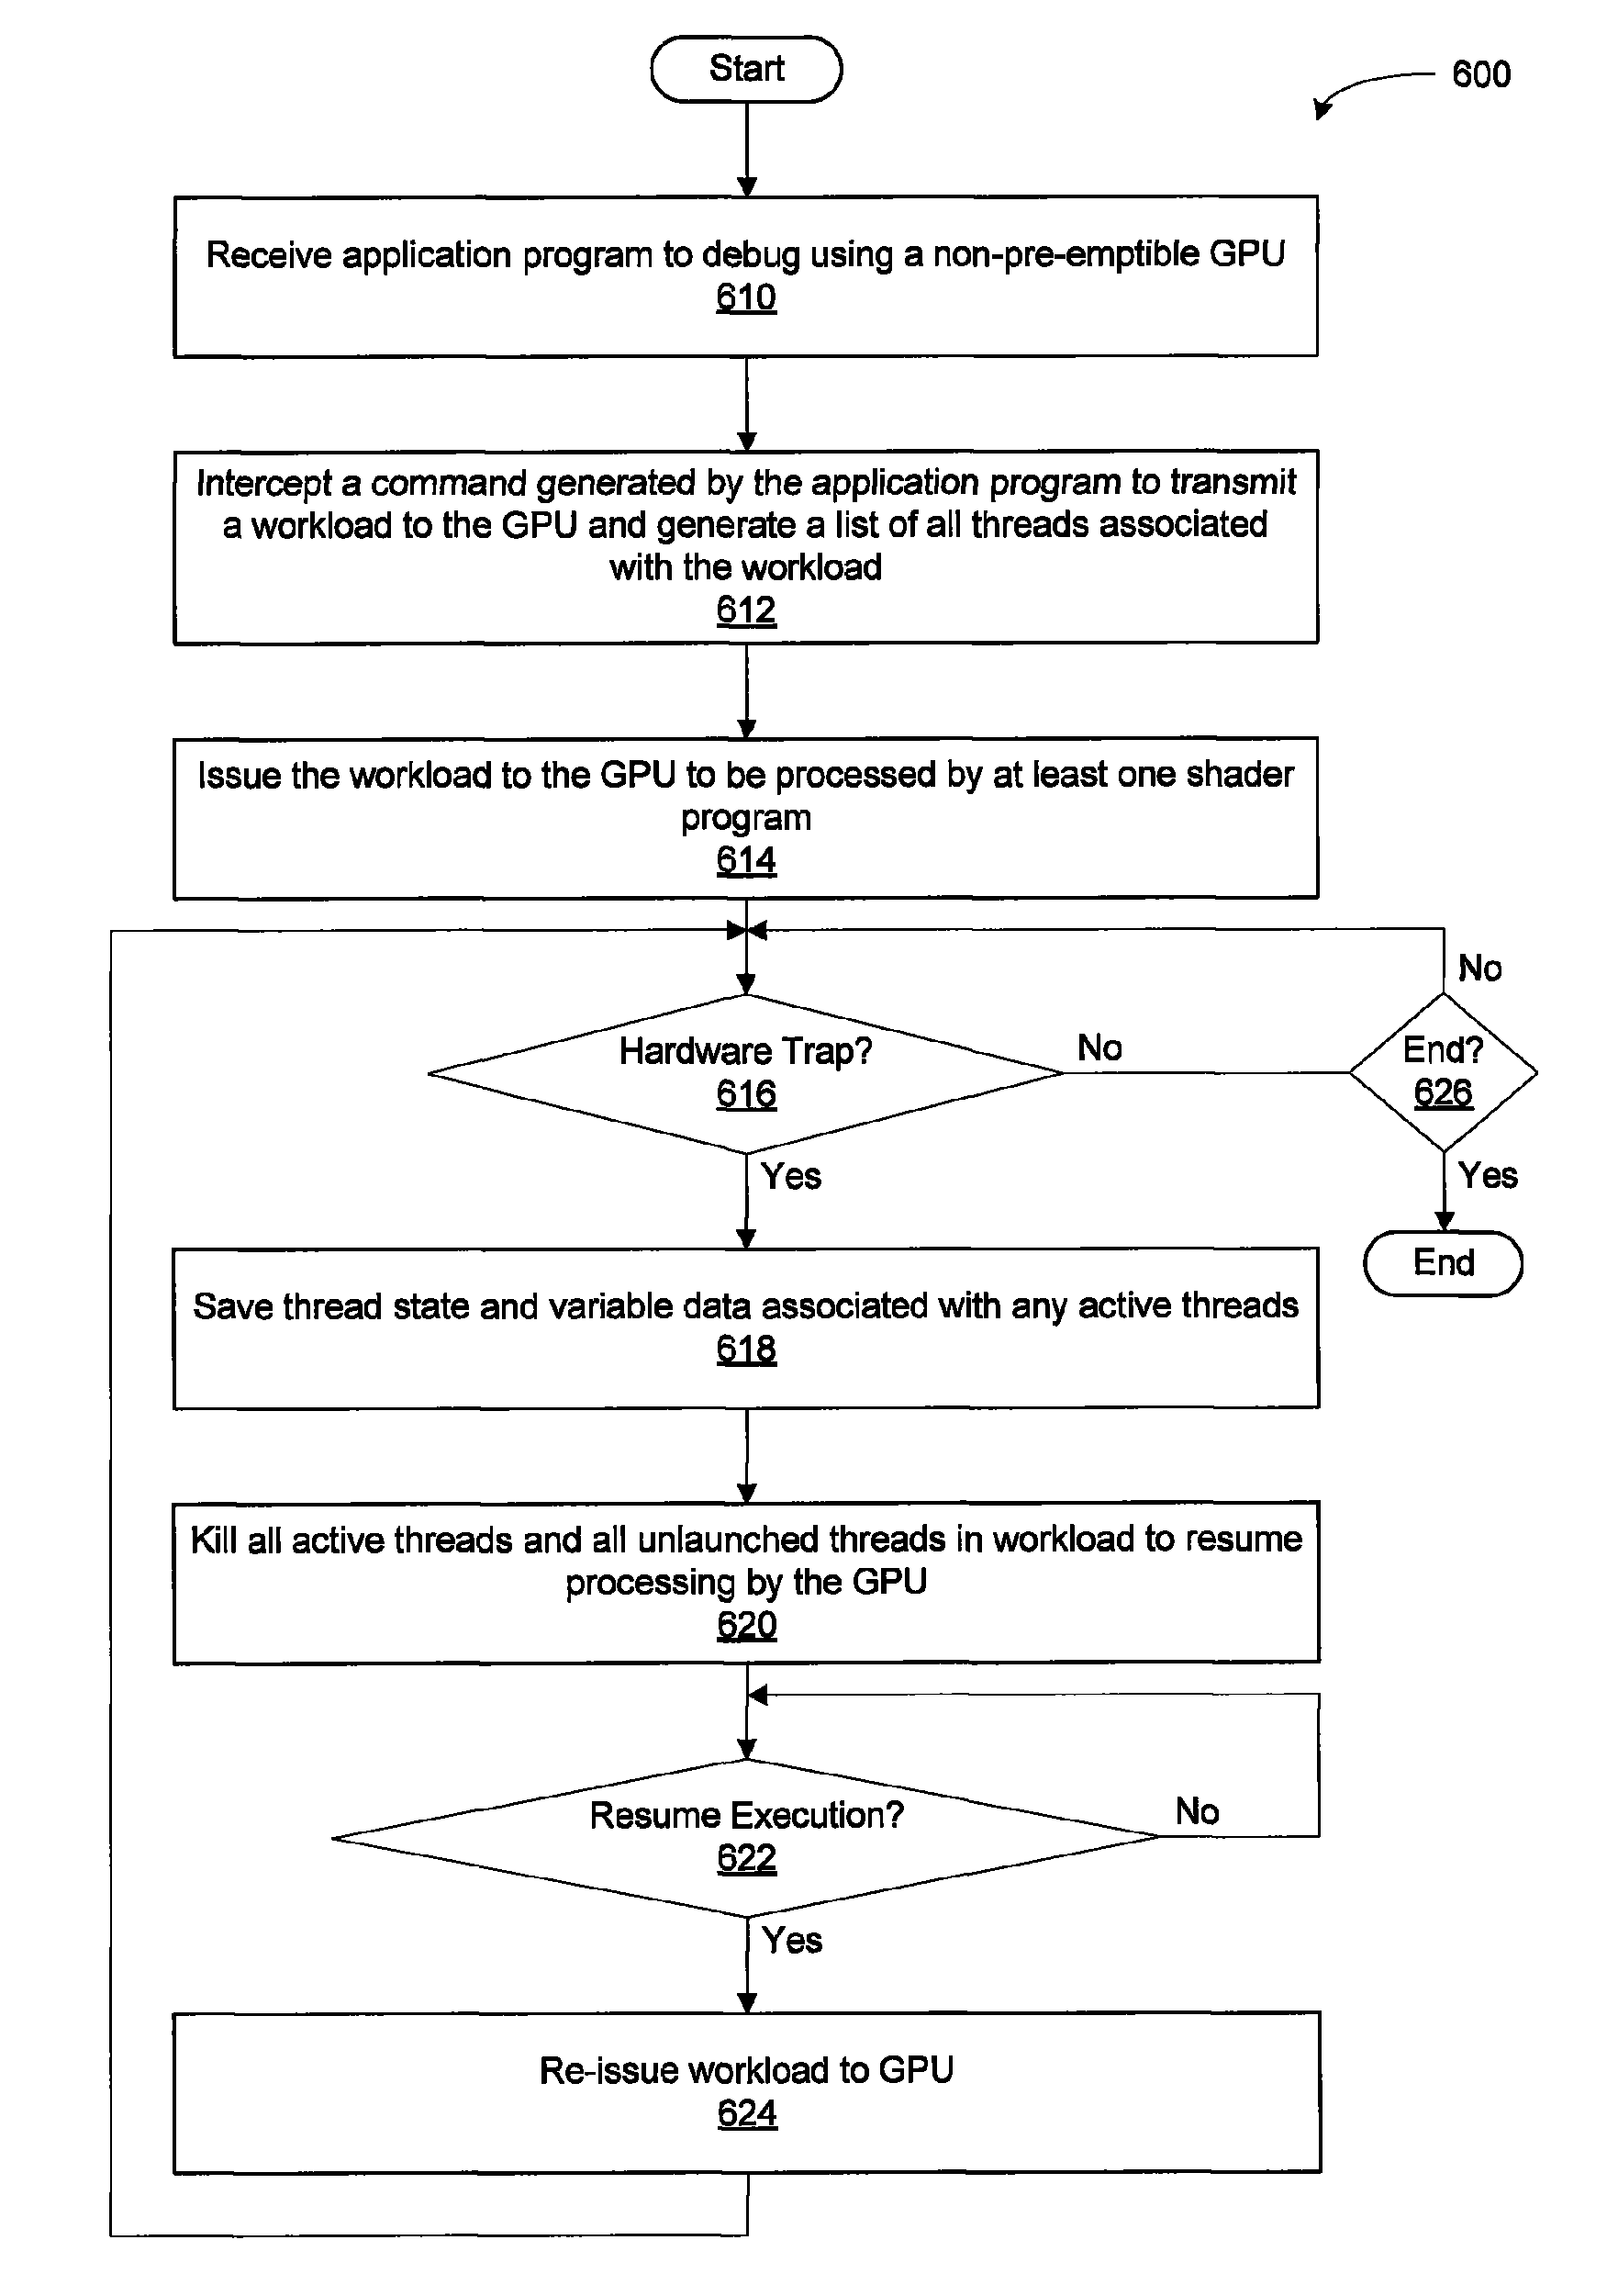 Methods and apparatus for interactive debugging on a non-preemptible graphics processing unit